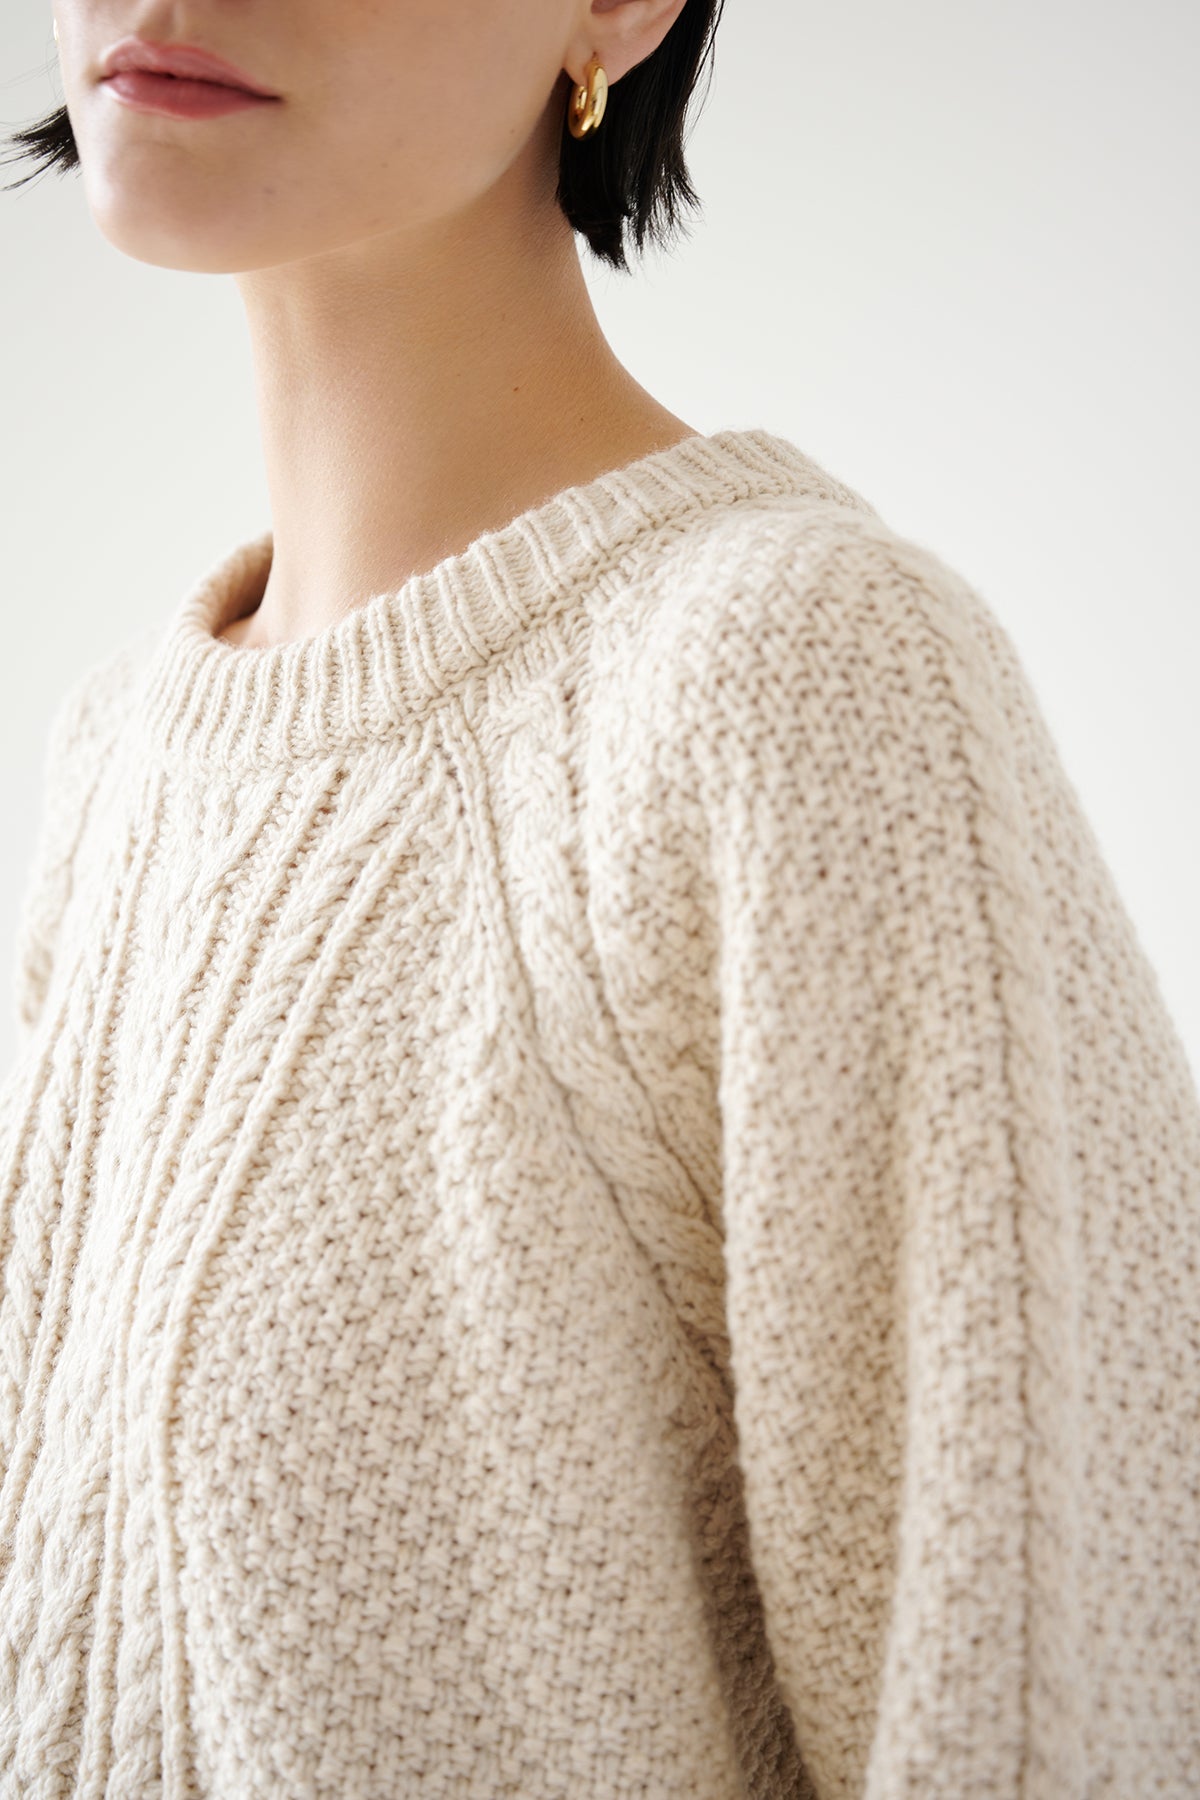 A woman donning a cream HERMOSA SWEATER by Velvet by Jenny Graham, perfect for her cold-weather wardrobe.-35547403256001